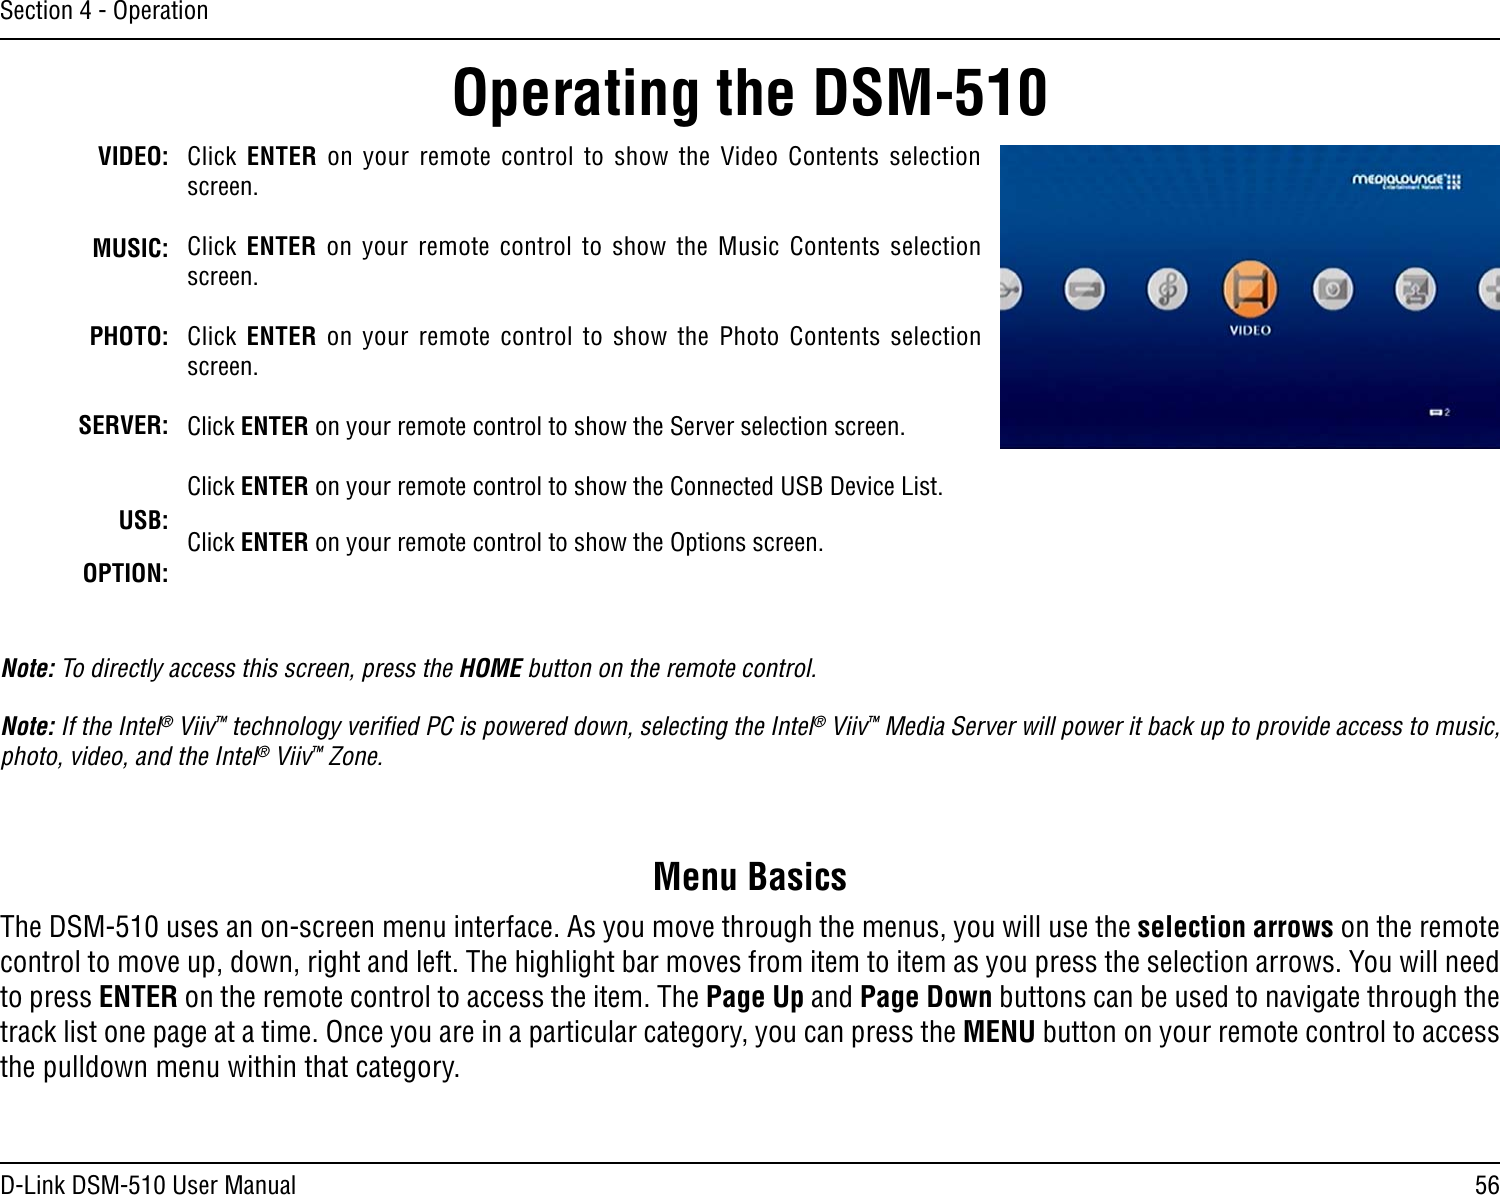 56D-Link DSM-510 User ManualSection 4 - OperationVIDEO:MUSIC:PHOTO:SERVER:USB:OPTION:Click  ENTER  on  your  remote  control  to  show  the  Video  Contents  selection screen.Click  ENTER  on  your  remote  control  to  show  the  Music  Contents  selection screen.Click  ENTER  on  your  remote  control  to  show  the Photo  Contents  selection screen.Click ENTER on your remote control to show the Server selection screen.Click ENTER on your remote control to show the Connected USB Device List.Click ENTER on your remote control to show the Options screen.Operating the DSM-510Note: To directly access this screen, press the HOME button on the remote control.Note: If the Intel® Viiv™ technology veriﬁed PC is powered down, selecting the Intel® Viiv™ Media Server will power it back up to provide access to music, photo, video, and the Intel® Viiv™ Zone.The DSM-510 uses an on-screen menu interface. As you move through the menus, you will use the selection arrows on the remote control to move up, down, right and left. The highlight bar moves from item to item as you press the selection arrows. You will need to press ENTER on the remote control to access the item. The Page Up and Page Down buttons can be used to navigate through the track list one page at a time. Once you are in a particular category, you can press the MENU button on your remote control to access the pulldown menu within that category.Menu Basics